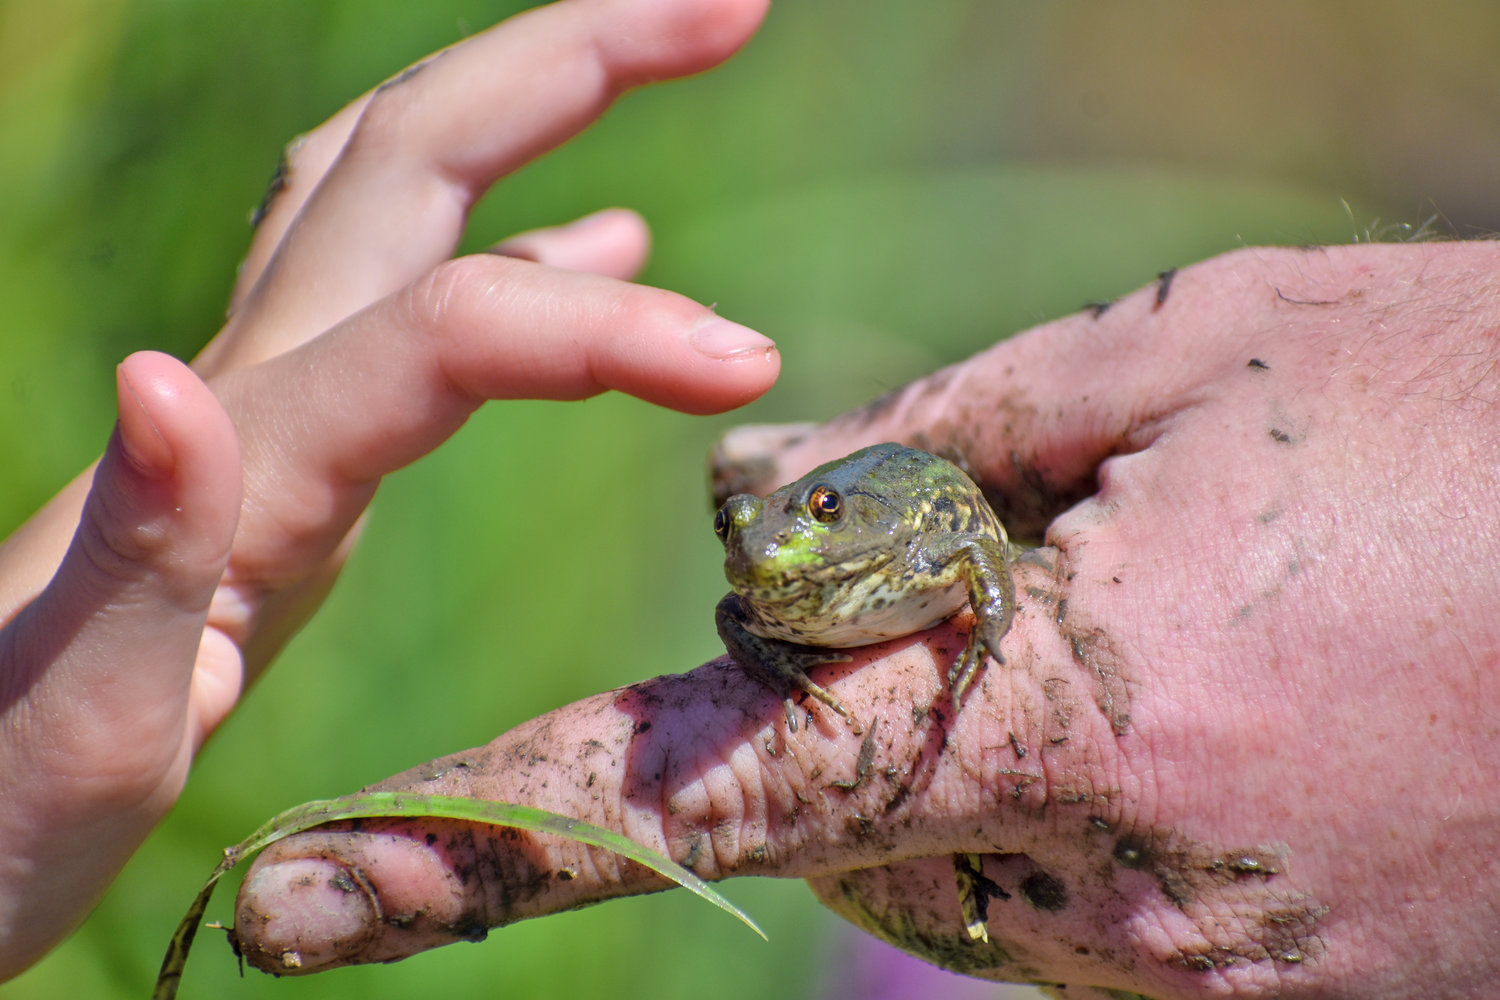 A frog was caught right away — not many children wanted to hold it, but a few were willing to give it a pat on the head.